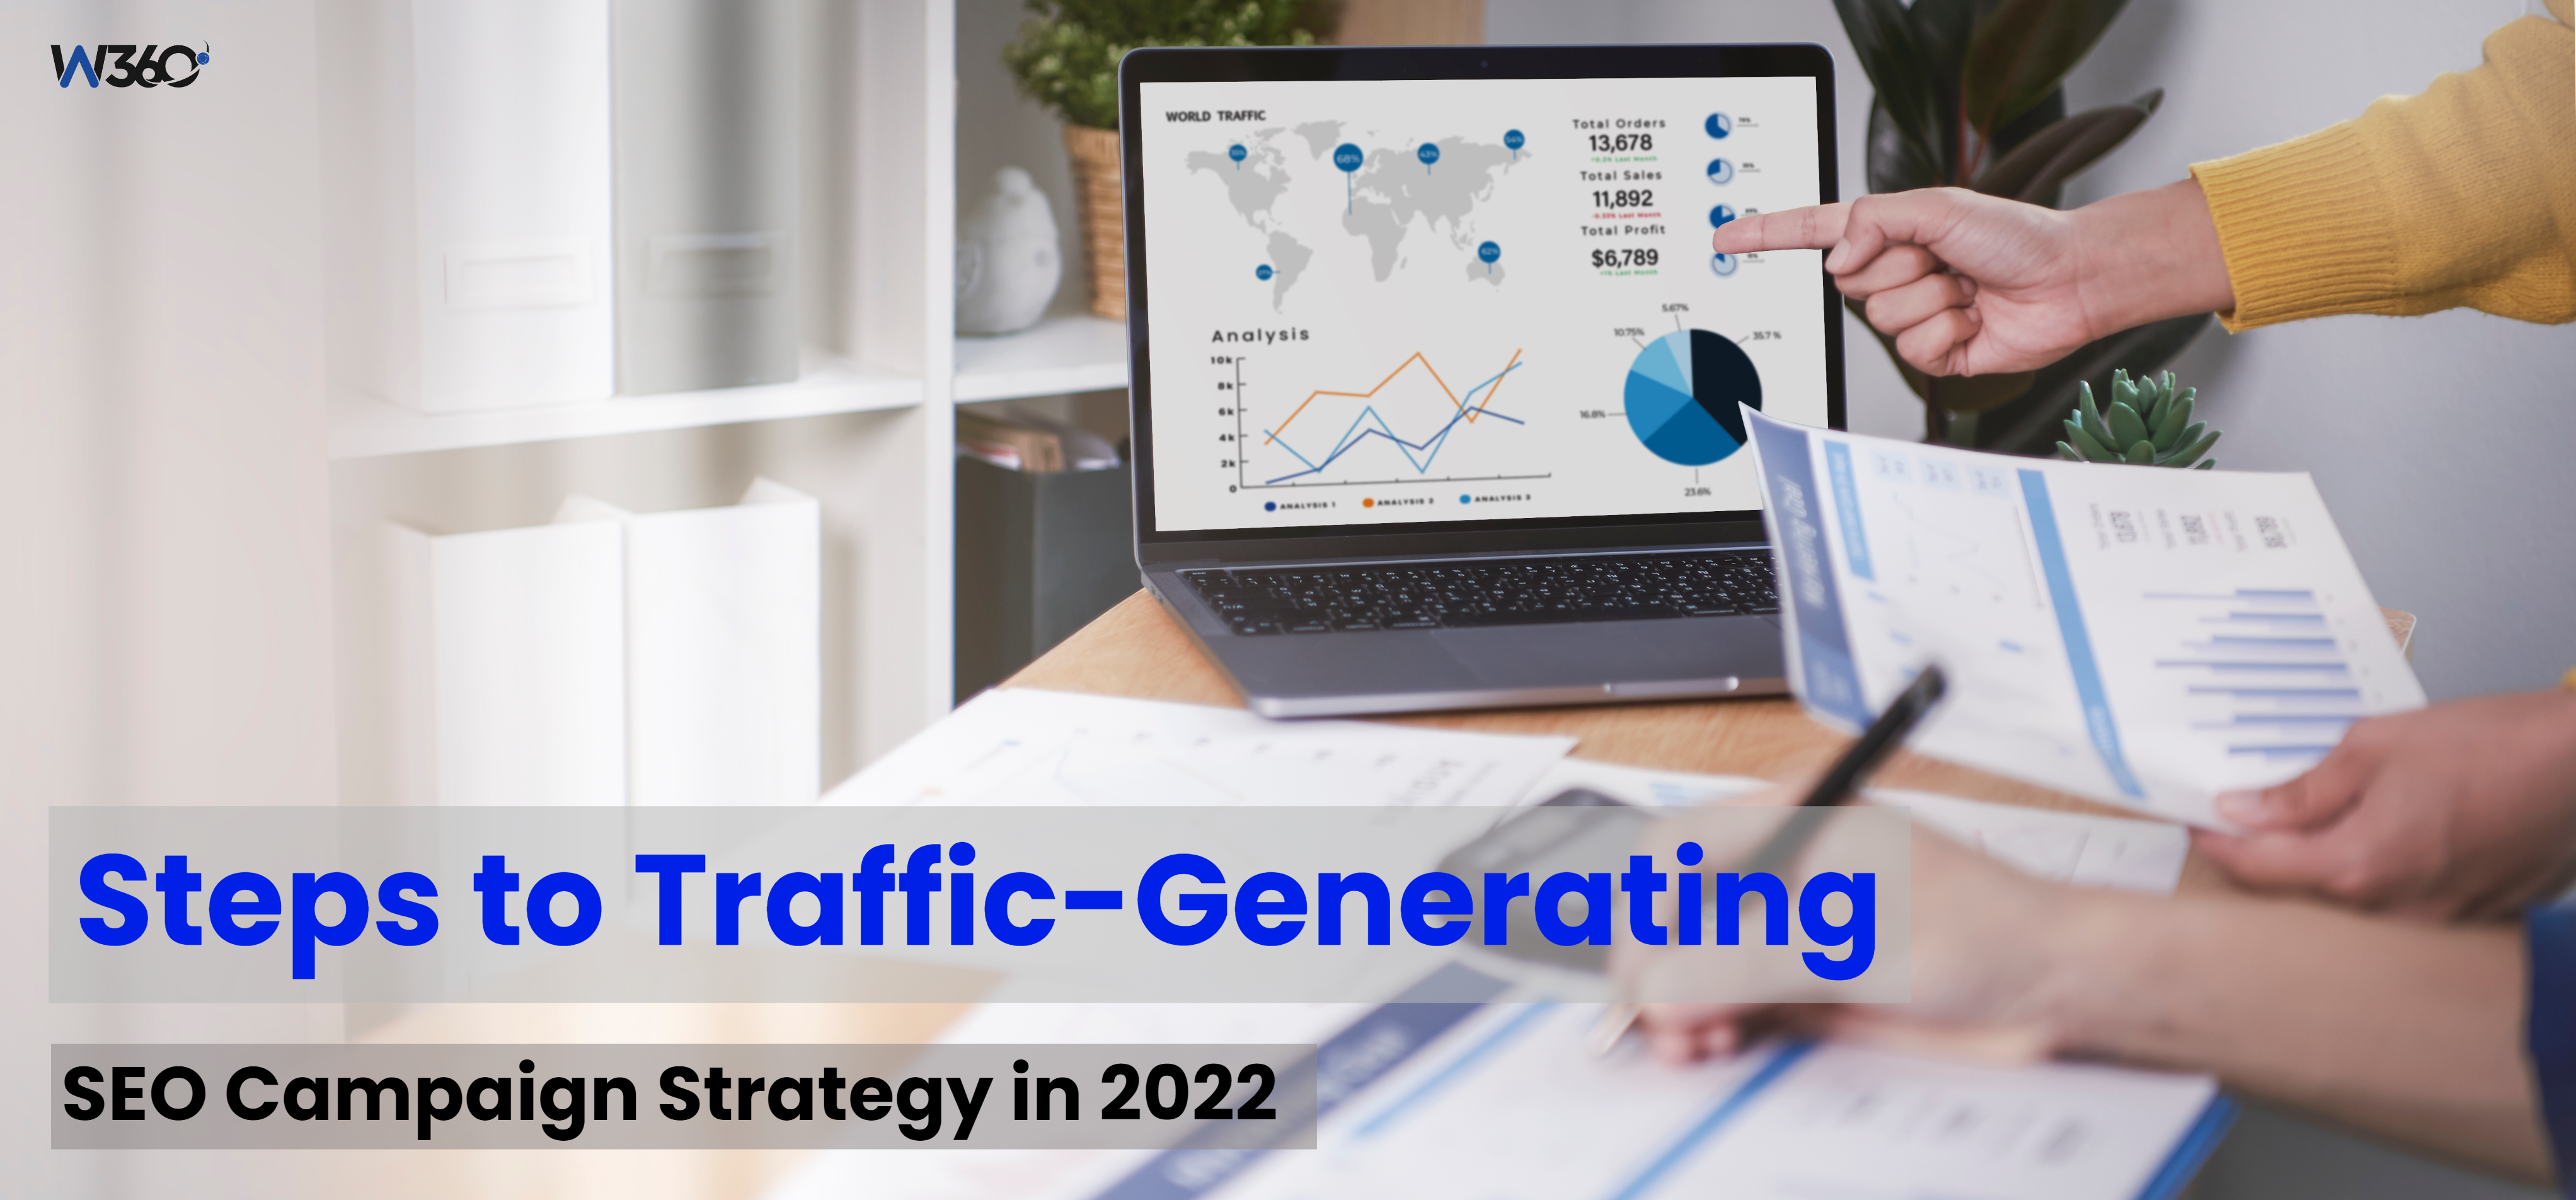 Steps to Traffic-Generating SEO Campaign Strategy in 2022